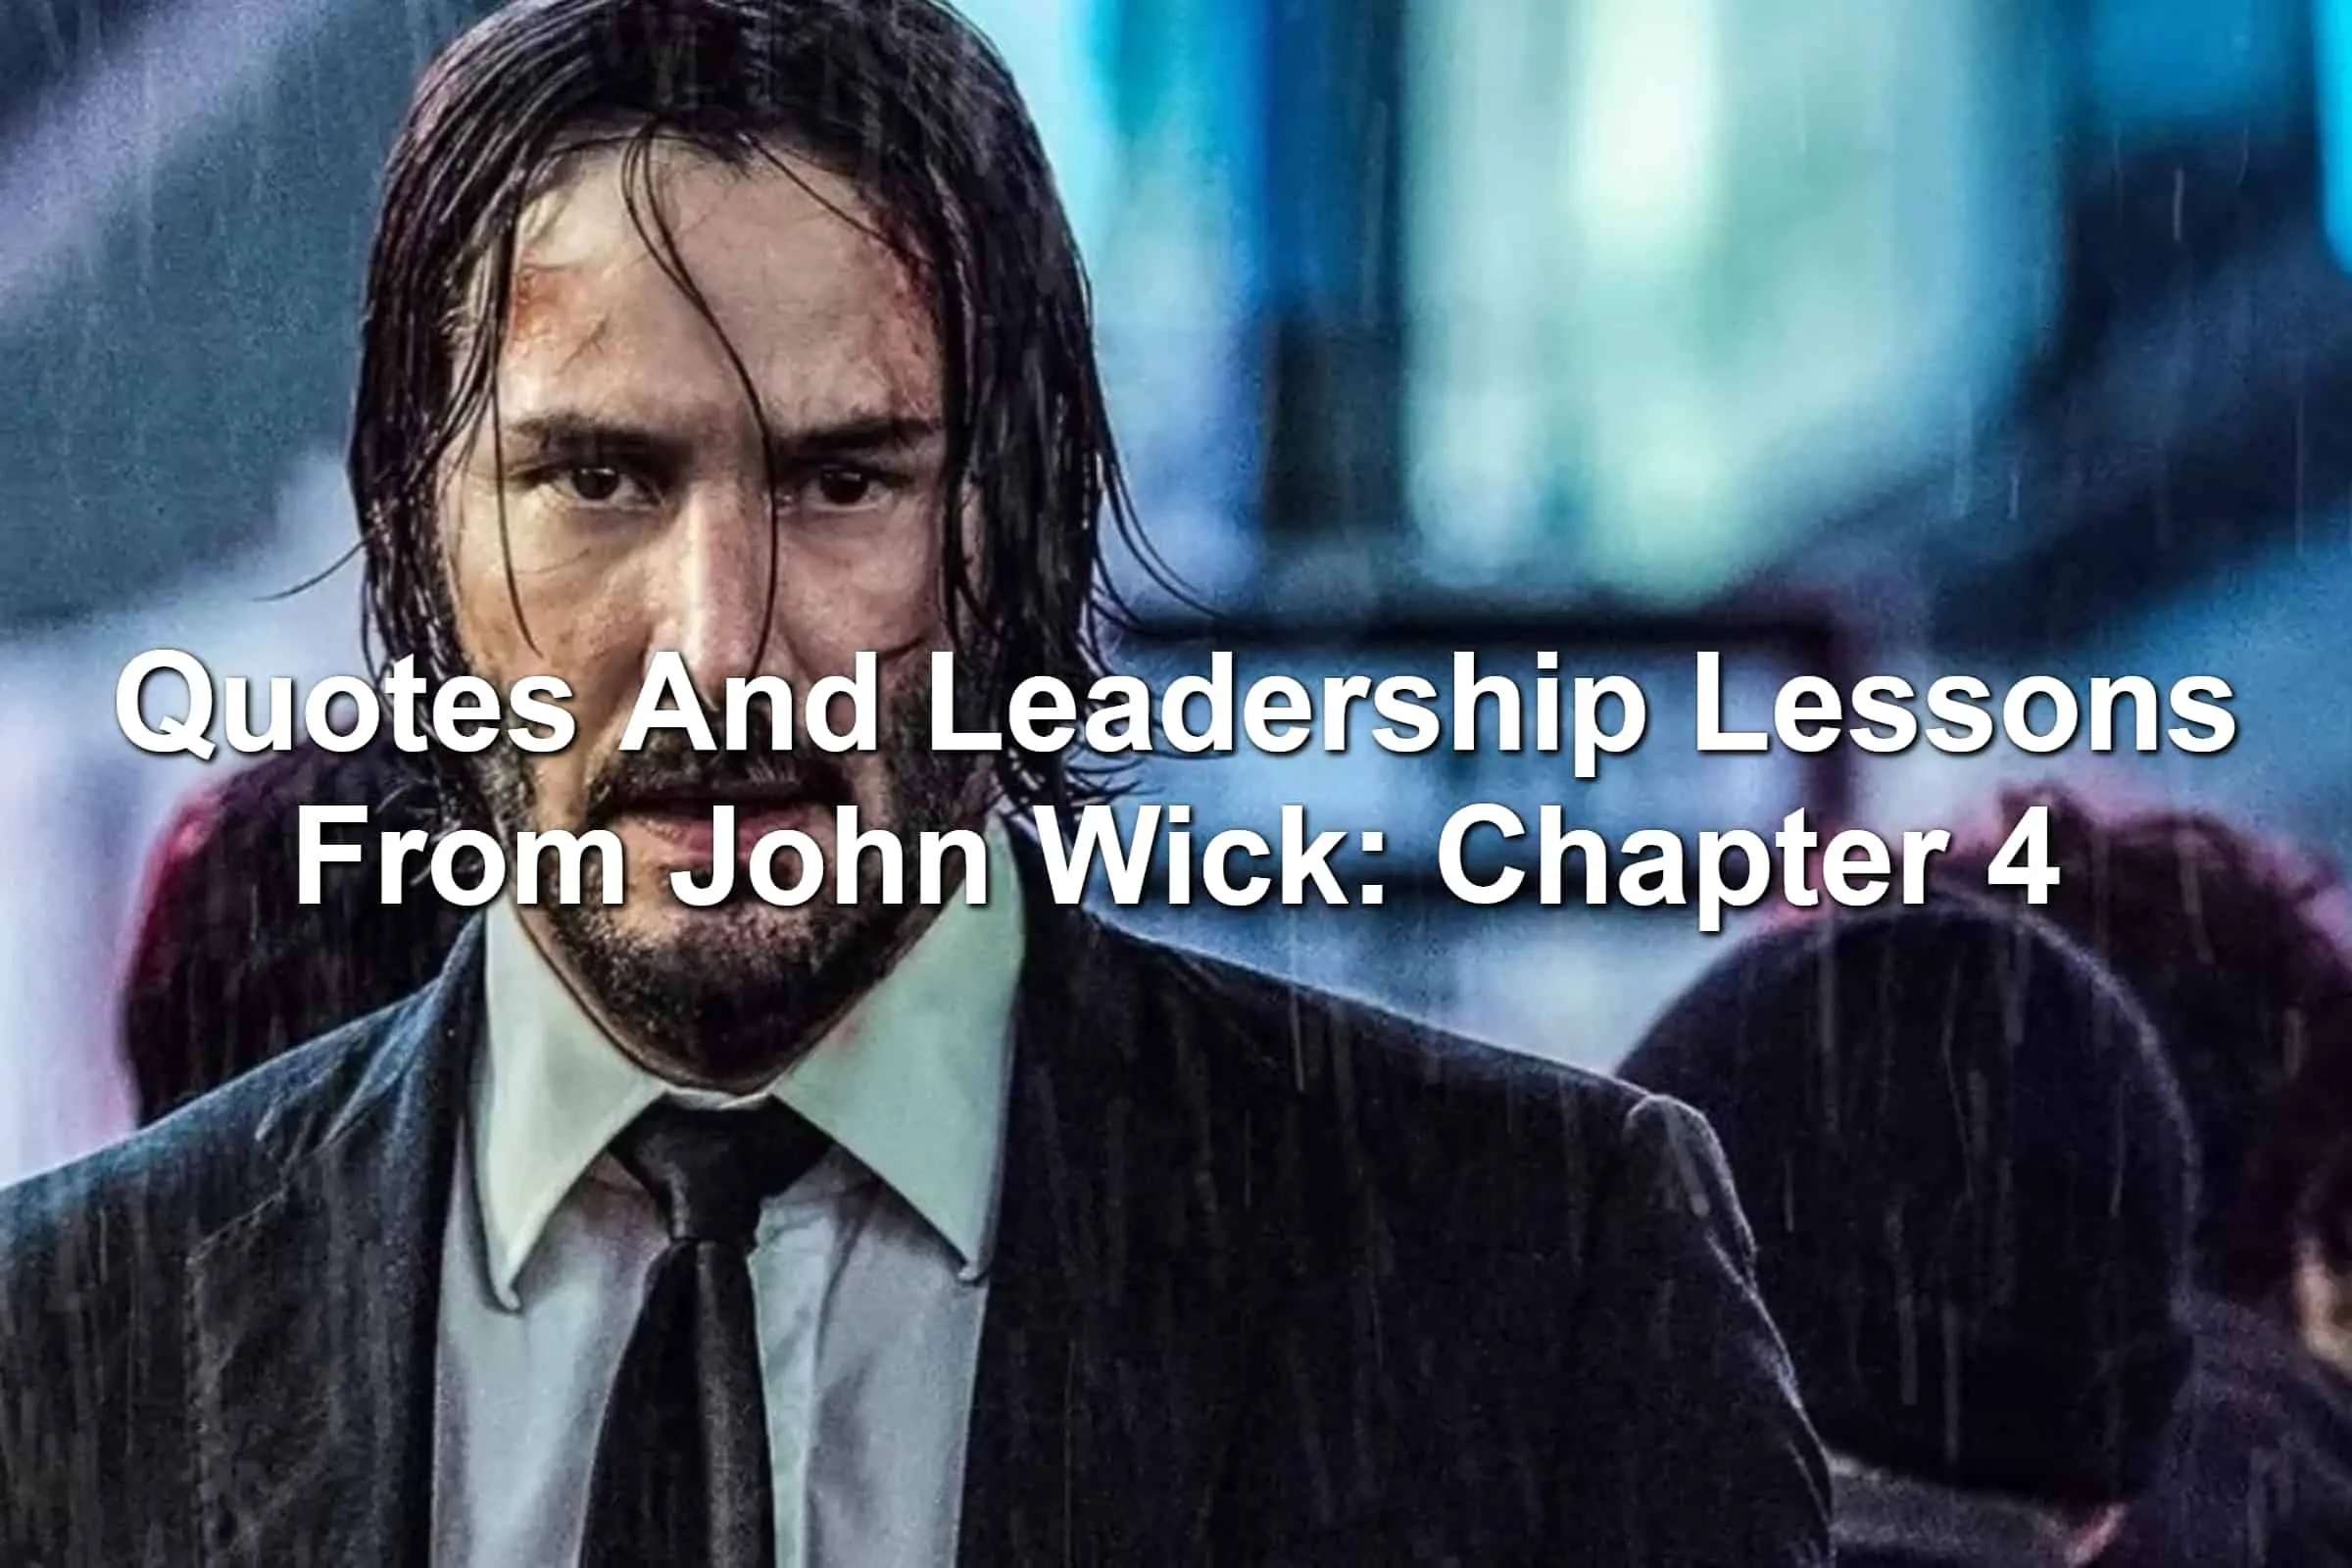 Watch: 'John Wick: Chapter 4' introduces new foes, family for Keanu Reeves  